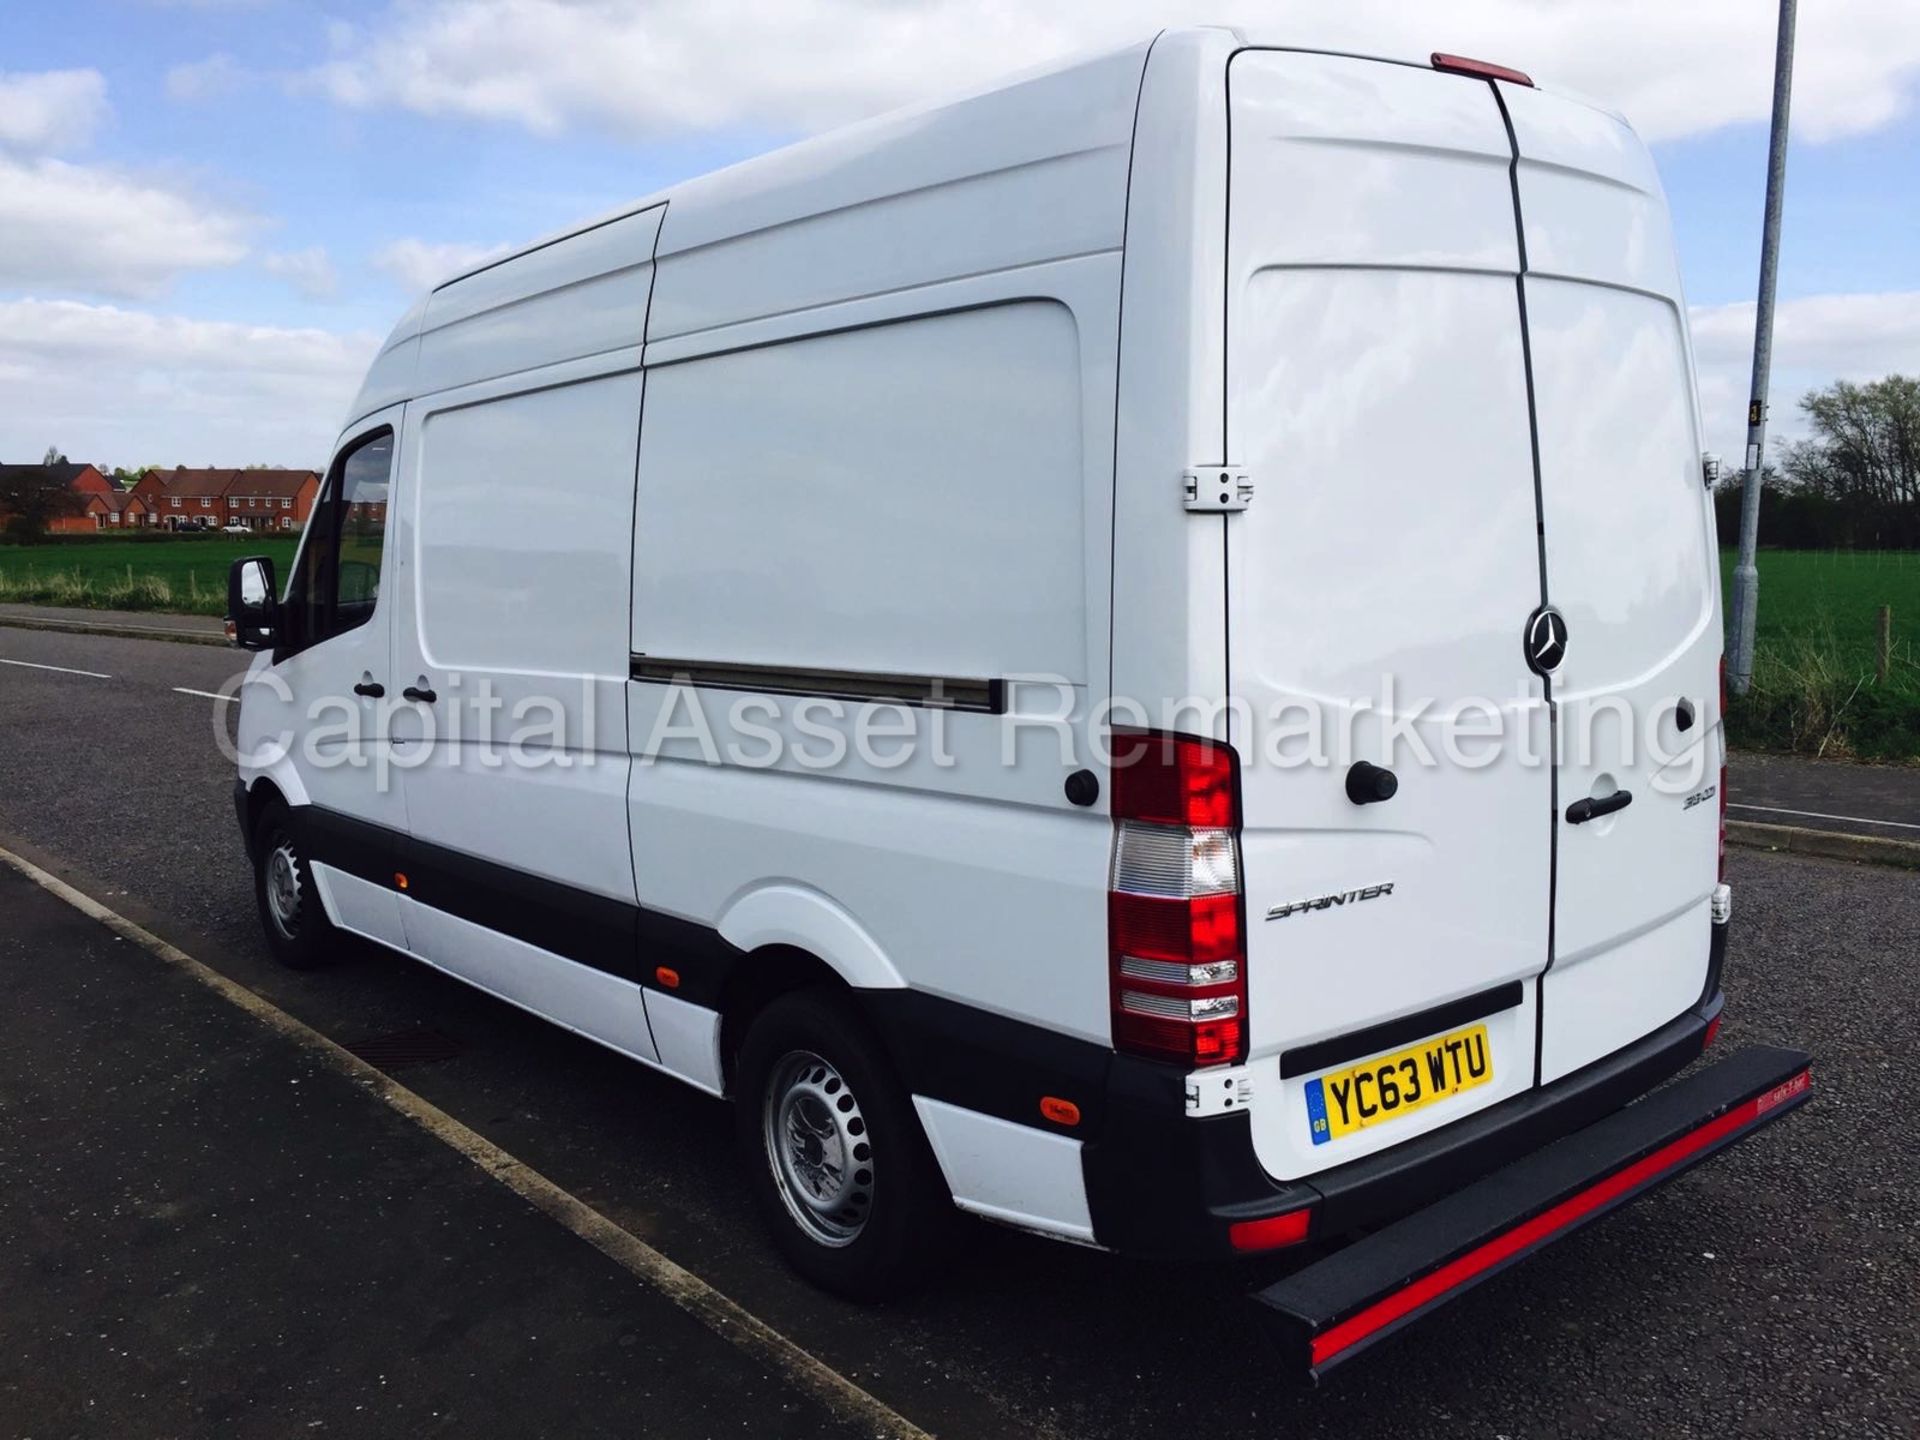 MERCEDES SPRINTER 313CDI "130BHP - 6 SPEED" FACELIFT MODEL / NEW SHAPE (2014 YEAR) 1 OWNER - Image 5 of 11